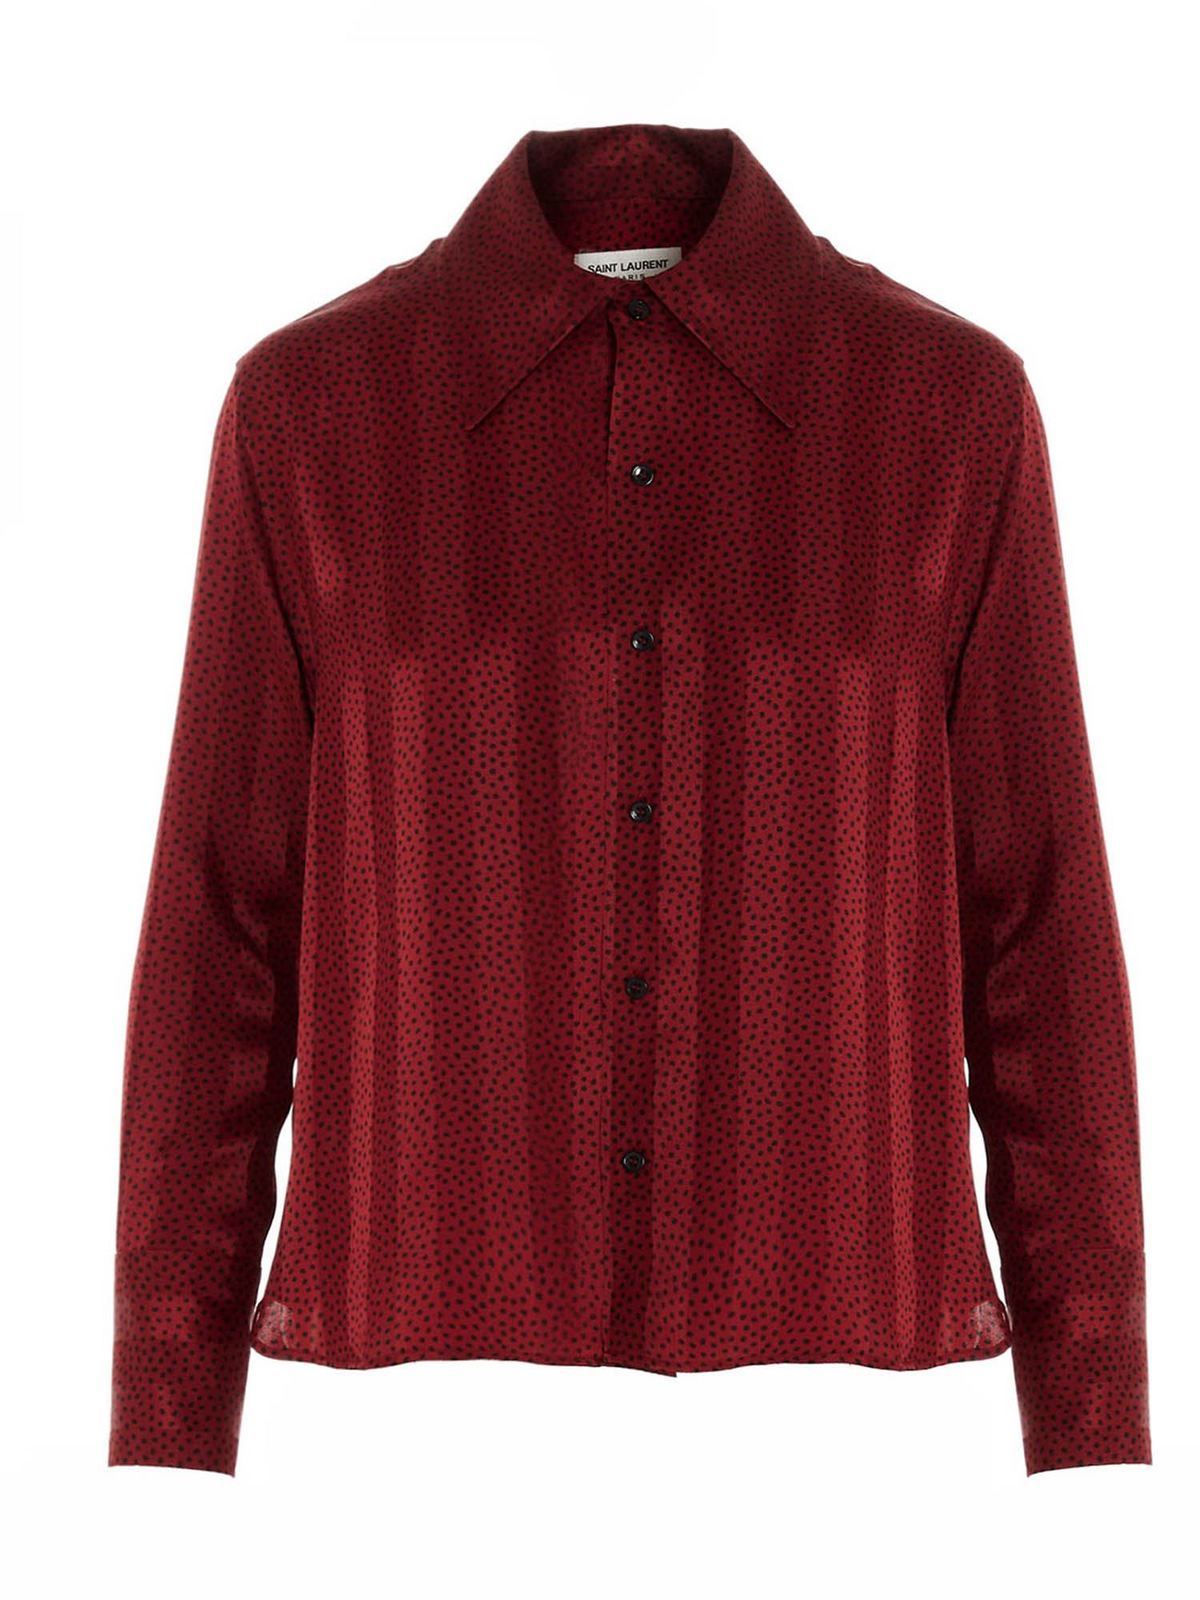 Saint Laurent - Polka dot and striped shirt in red - shirts ...